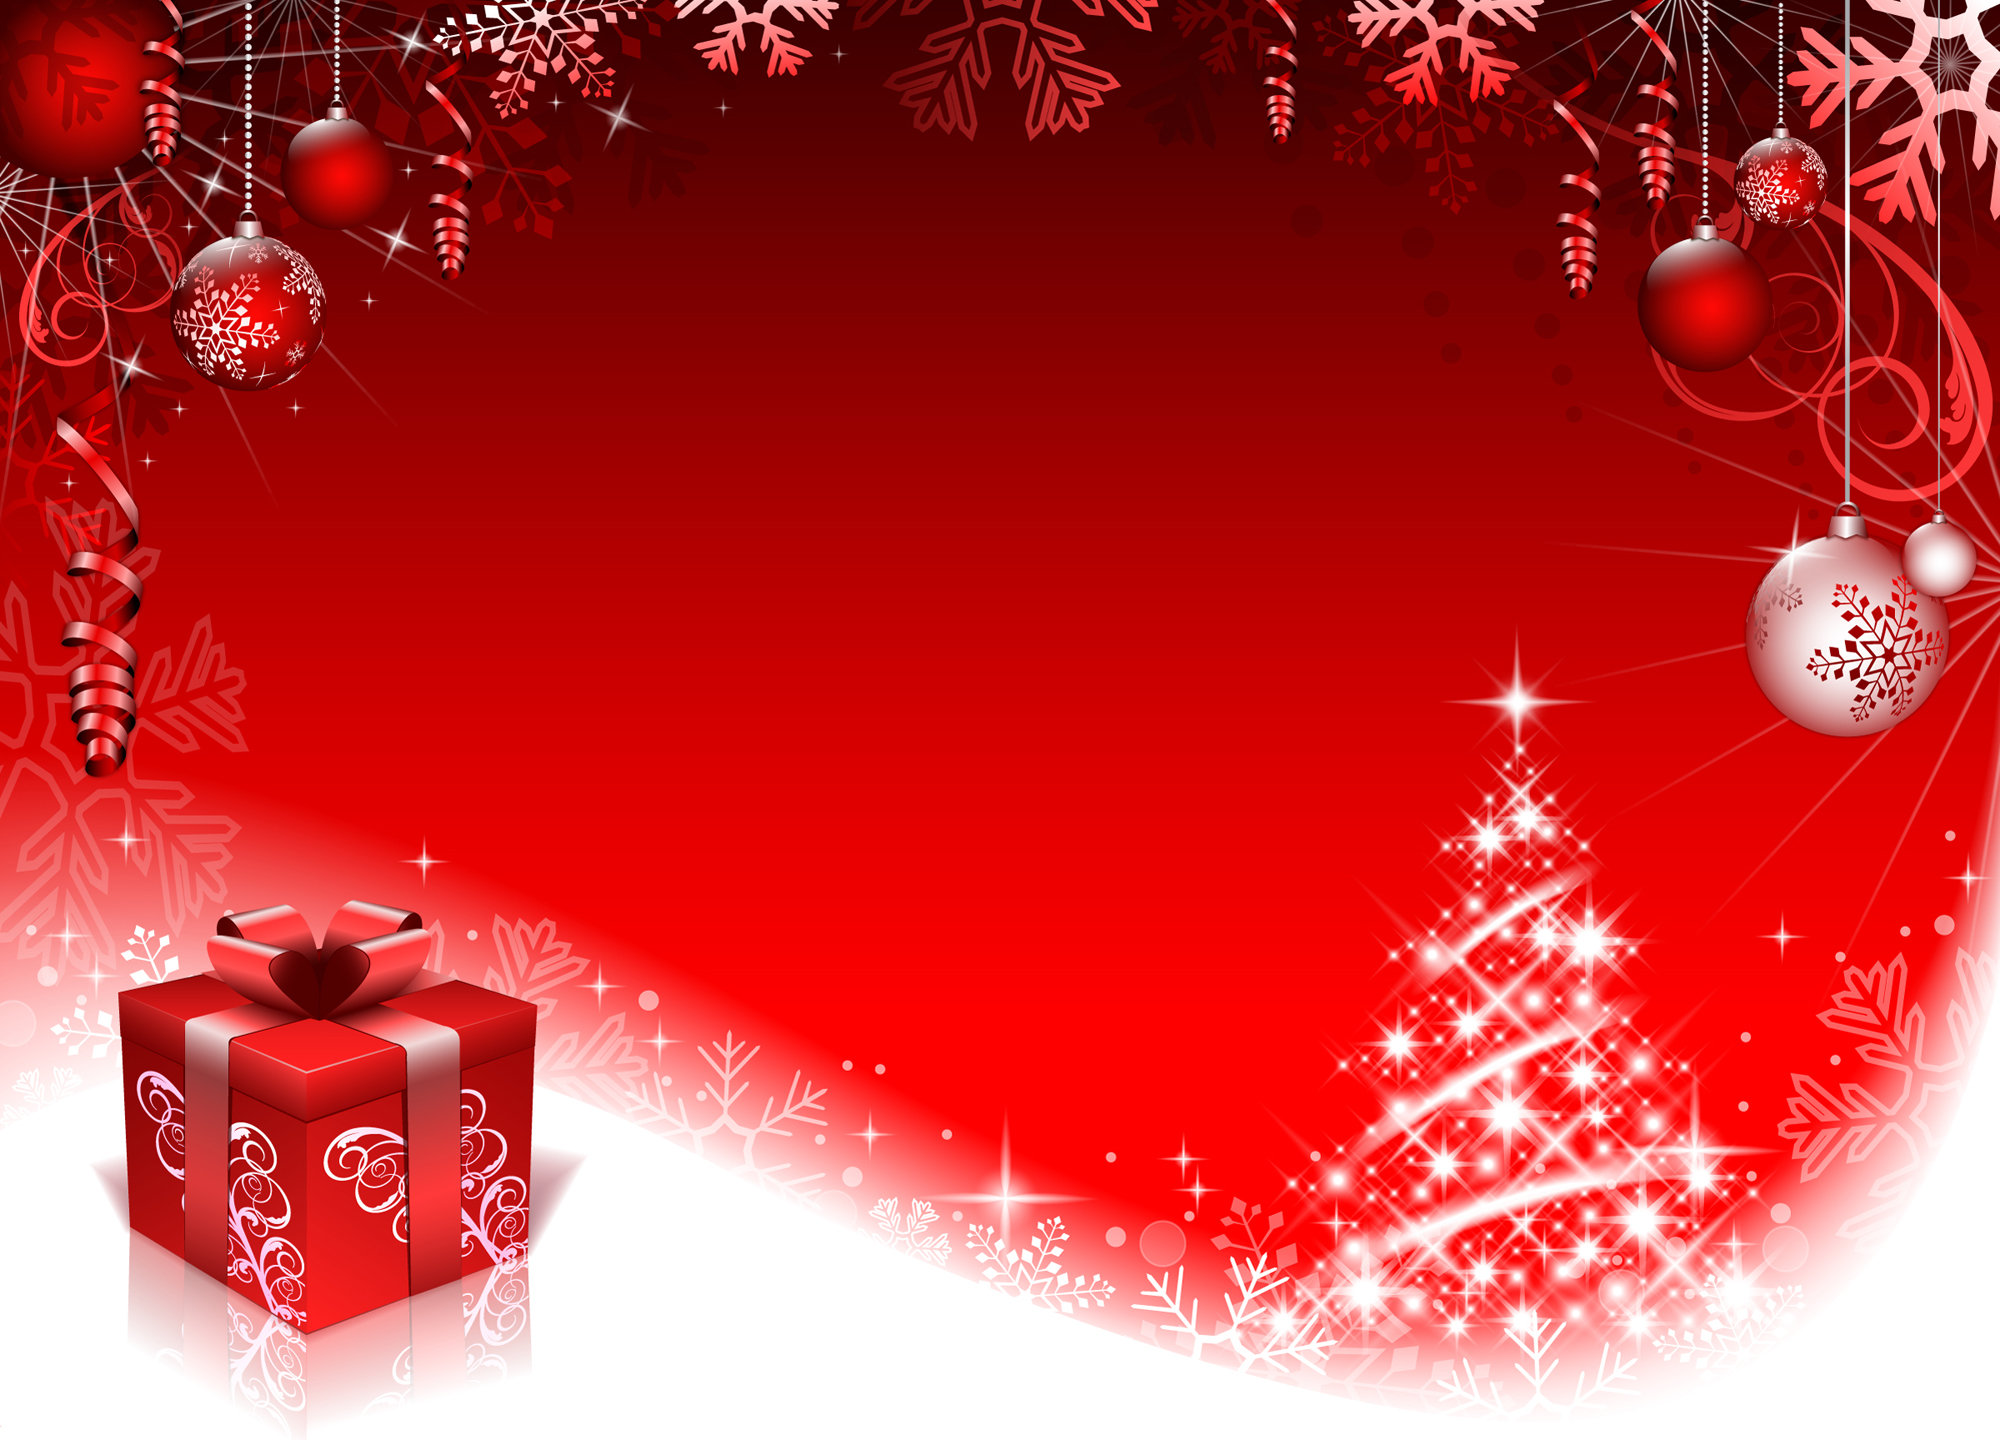 16 Free Templates For Christmas Images Free Red Christmas